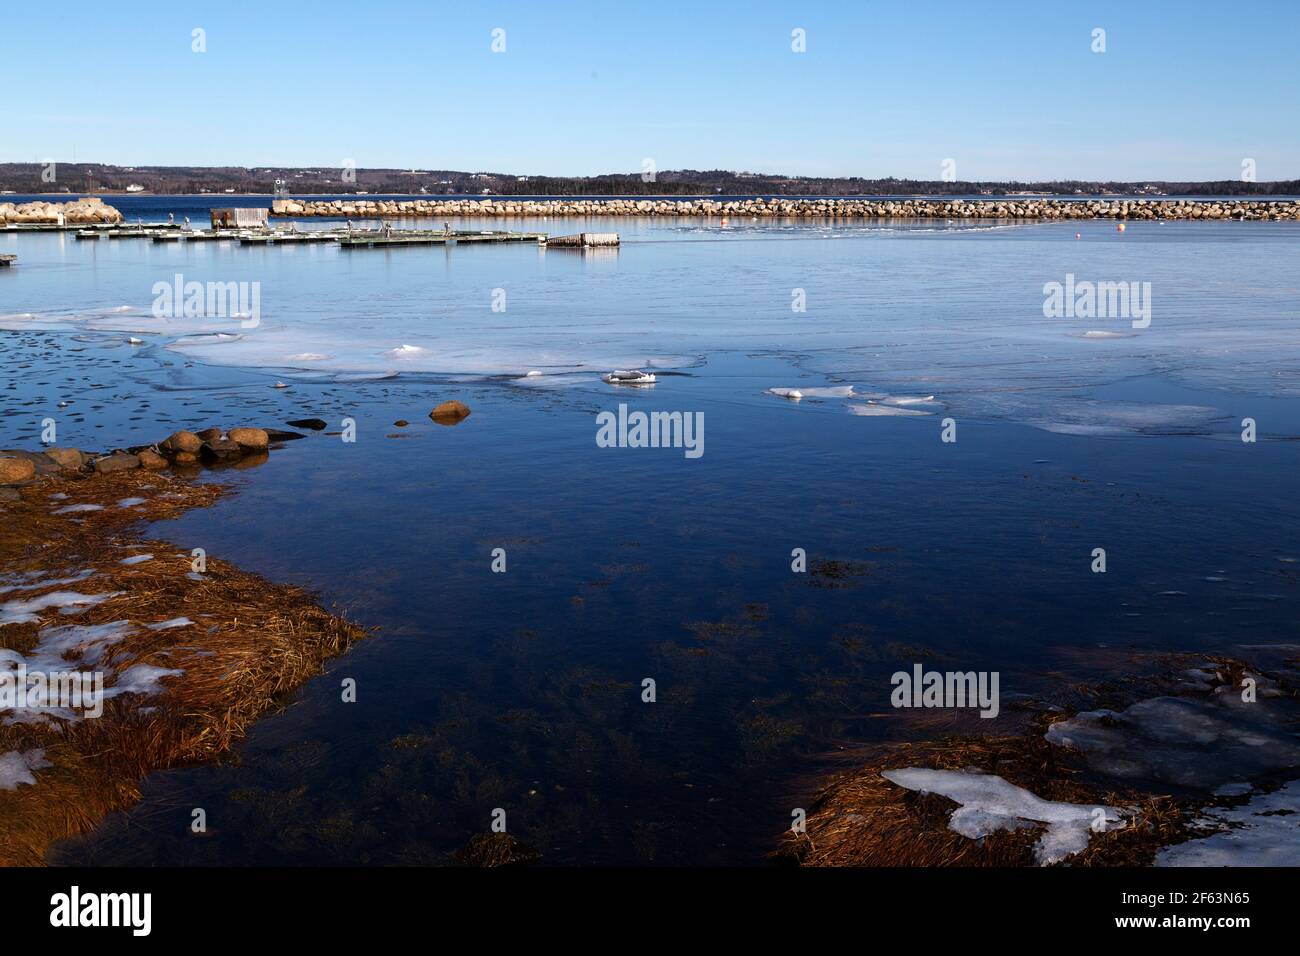 Sheet ice floats in the partially frozen Rafuses Cove in Nova Scotia, Canada. A pier protects the harbour. Stock Photo